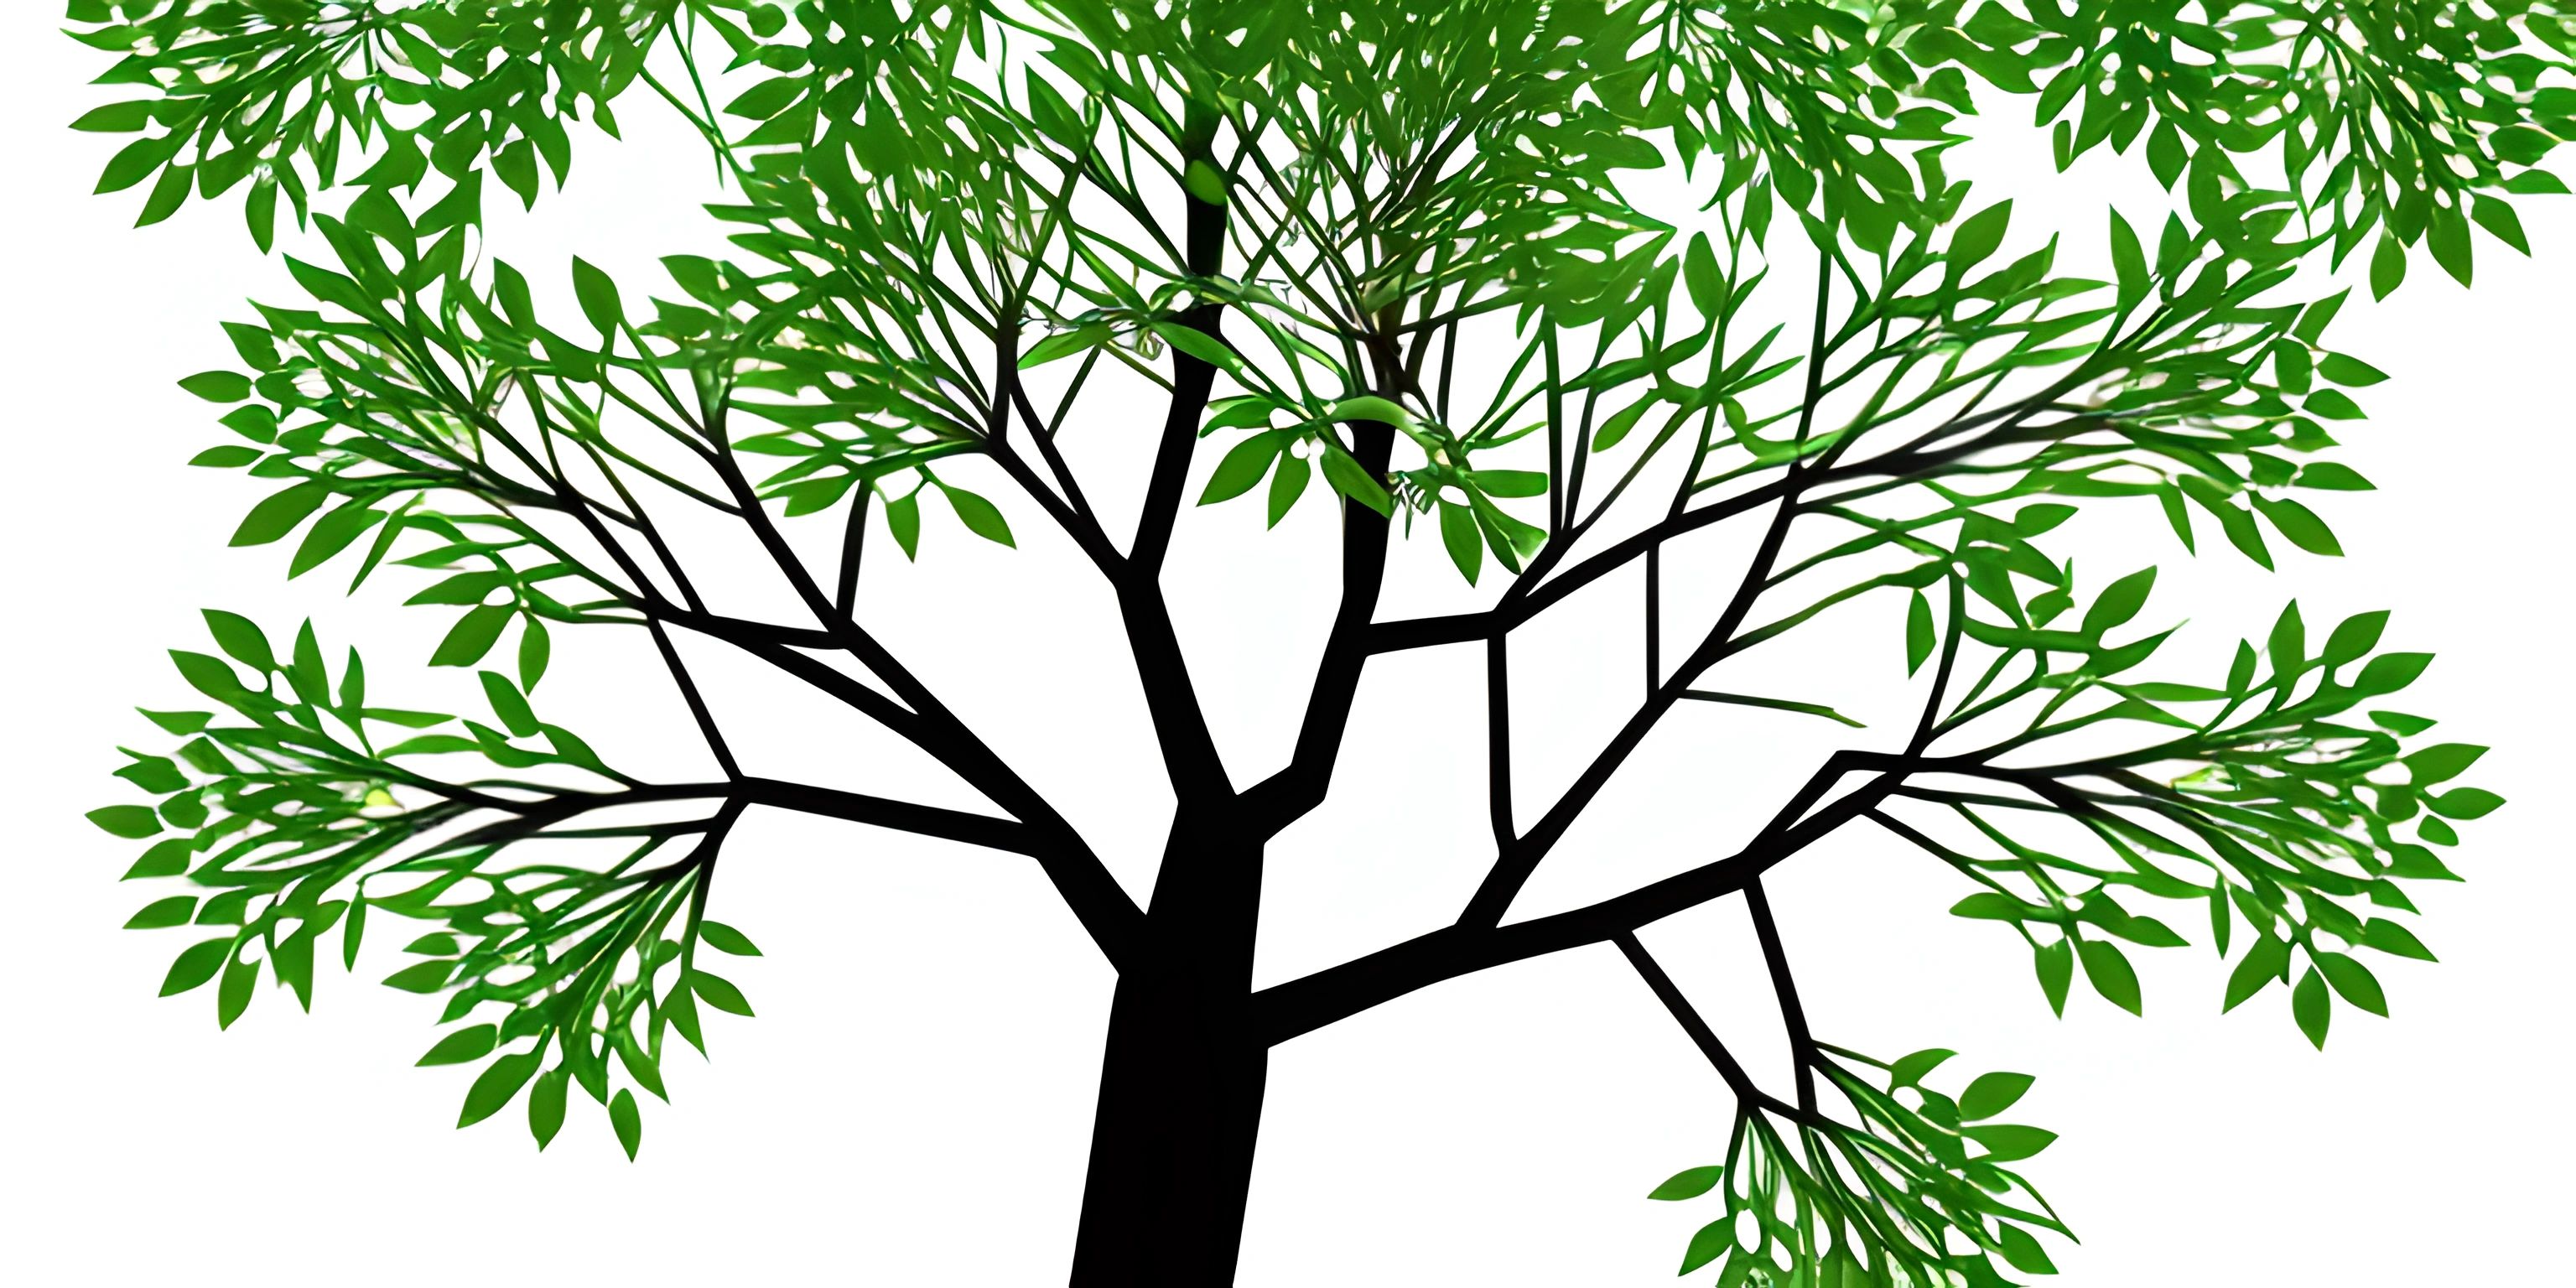 green tree with leaves and grass on white background vector art illustration by - vectorist com